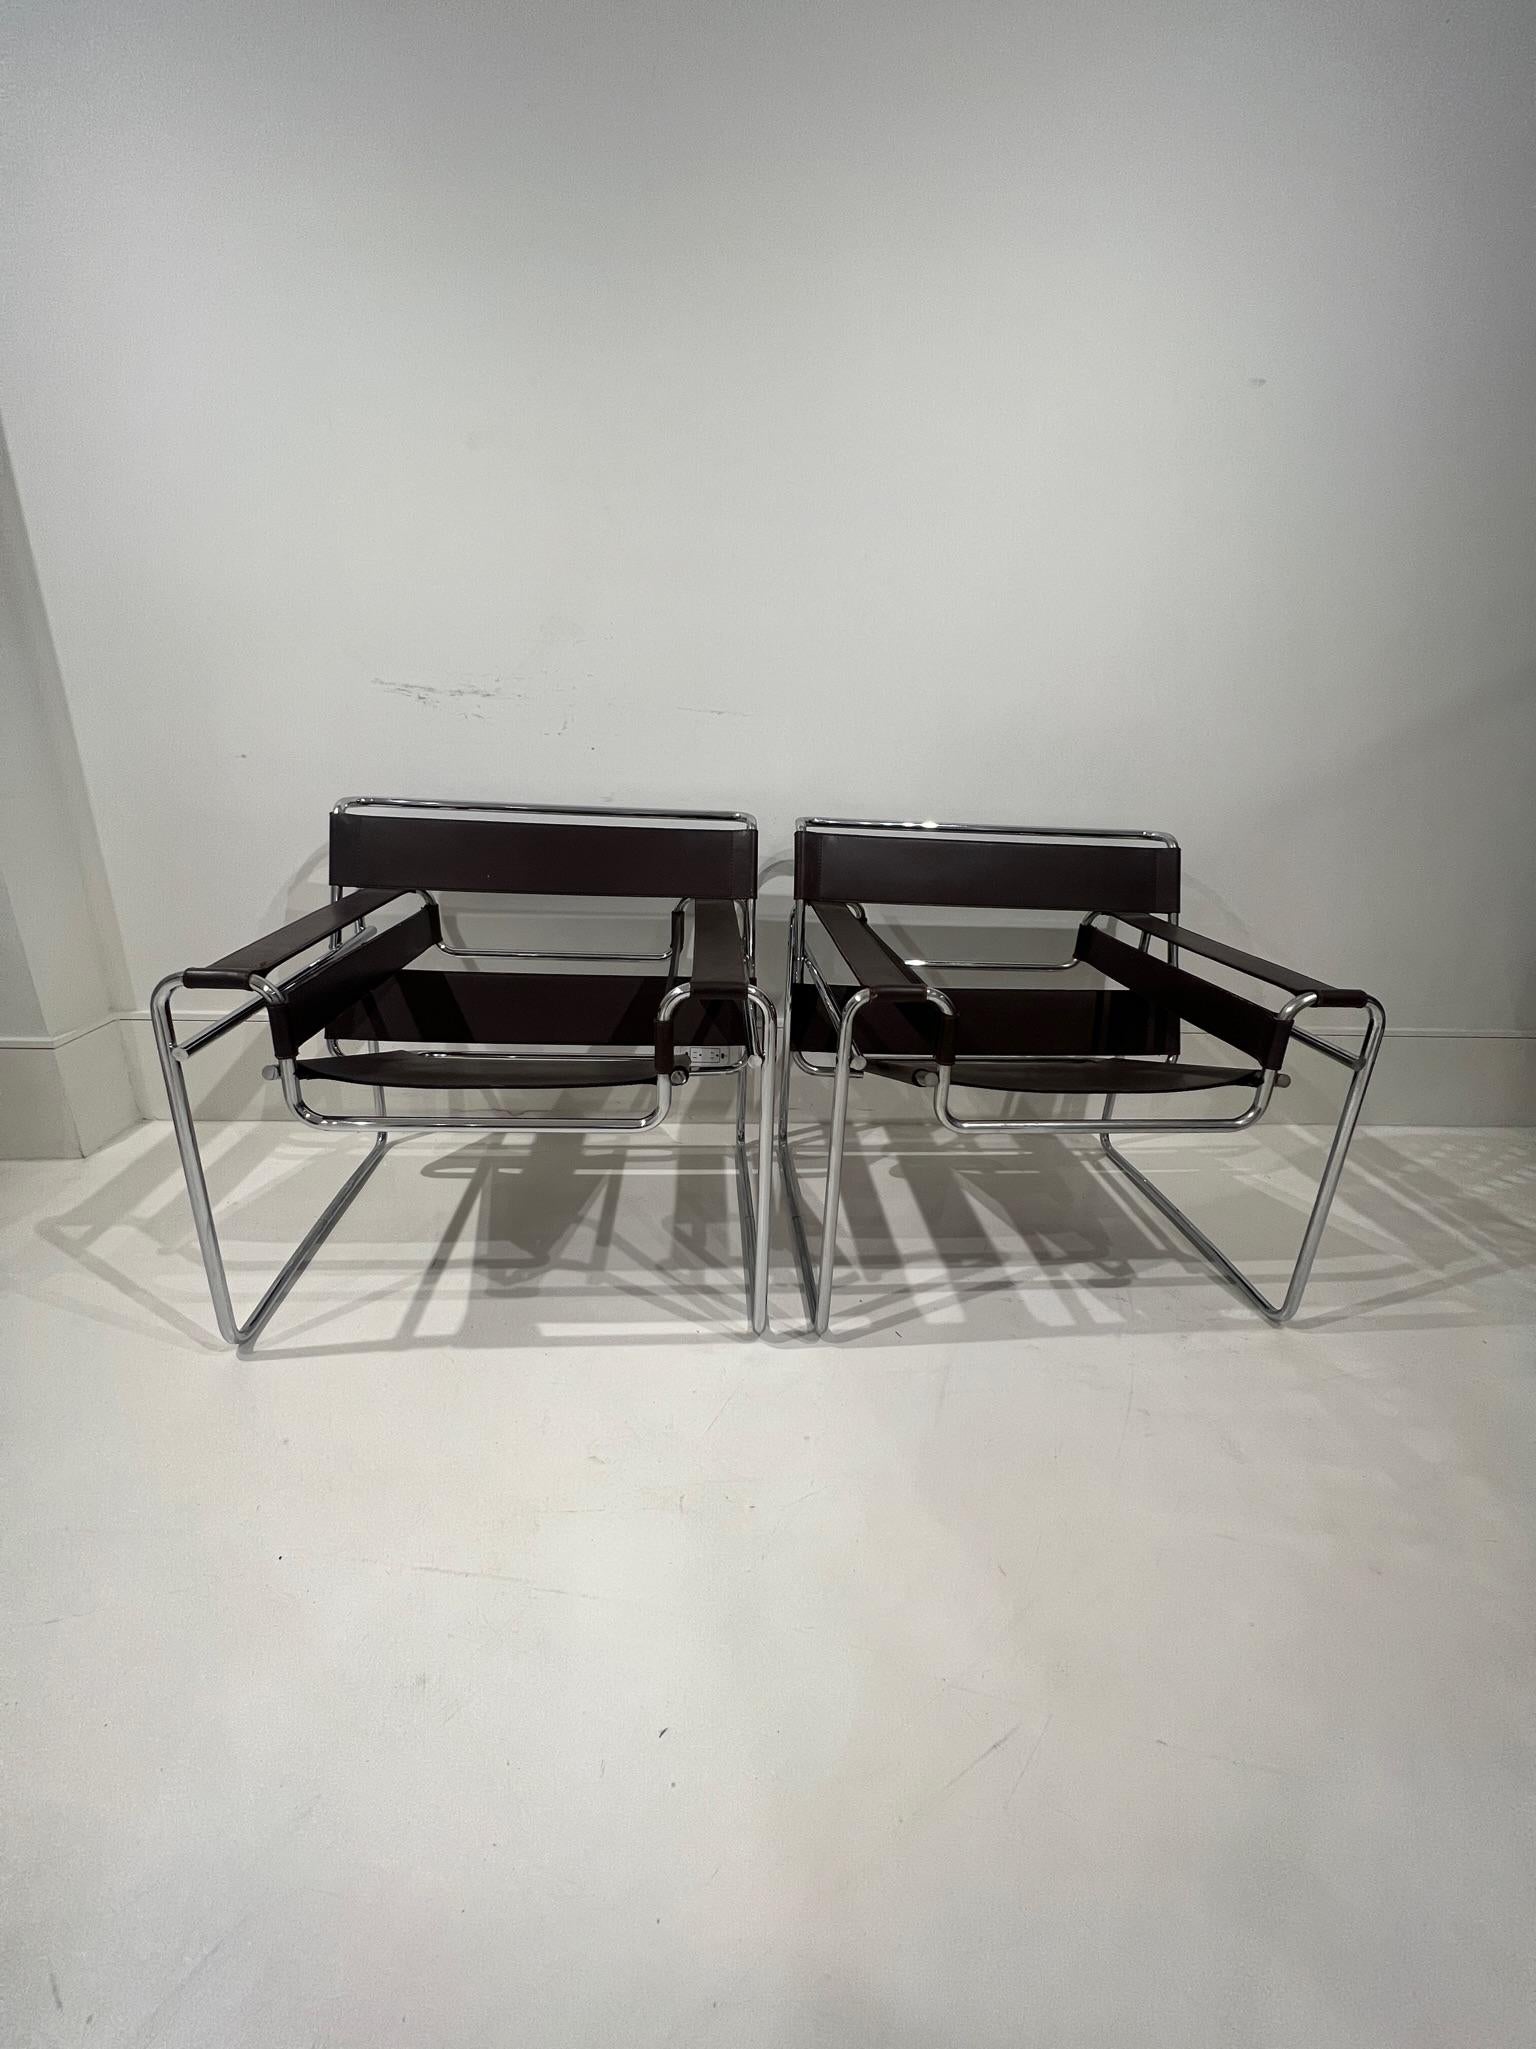 Immediately recognizable as a classic mid-century icon, this identical pair will transform any room into a casual/chic environment.  These chairs are in remarkable good condition with very minor losses on some of the leather.   